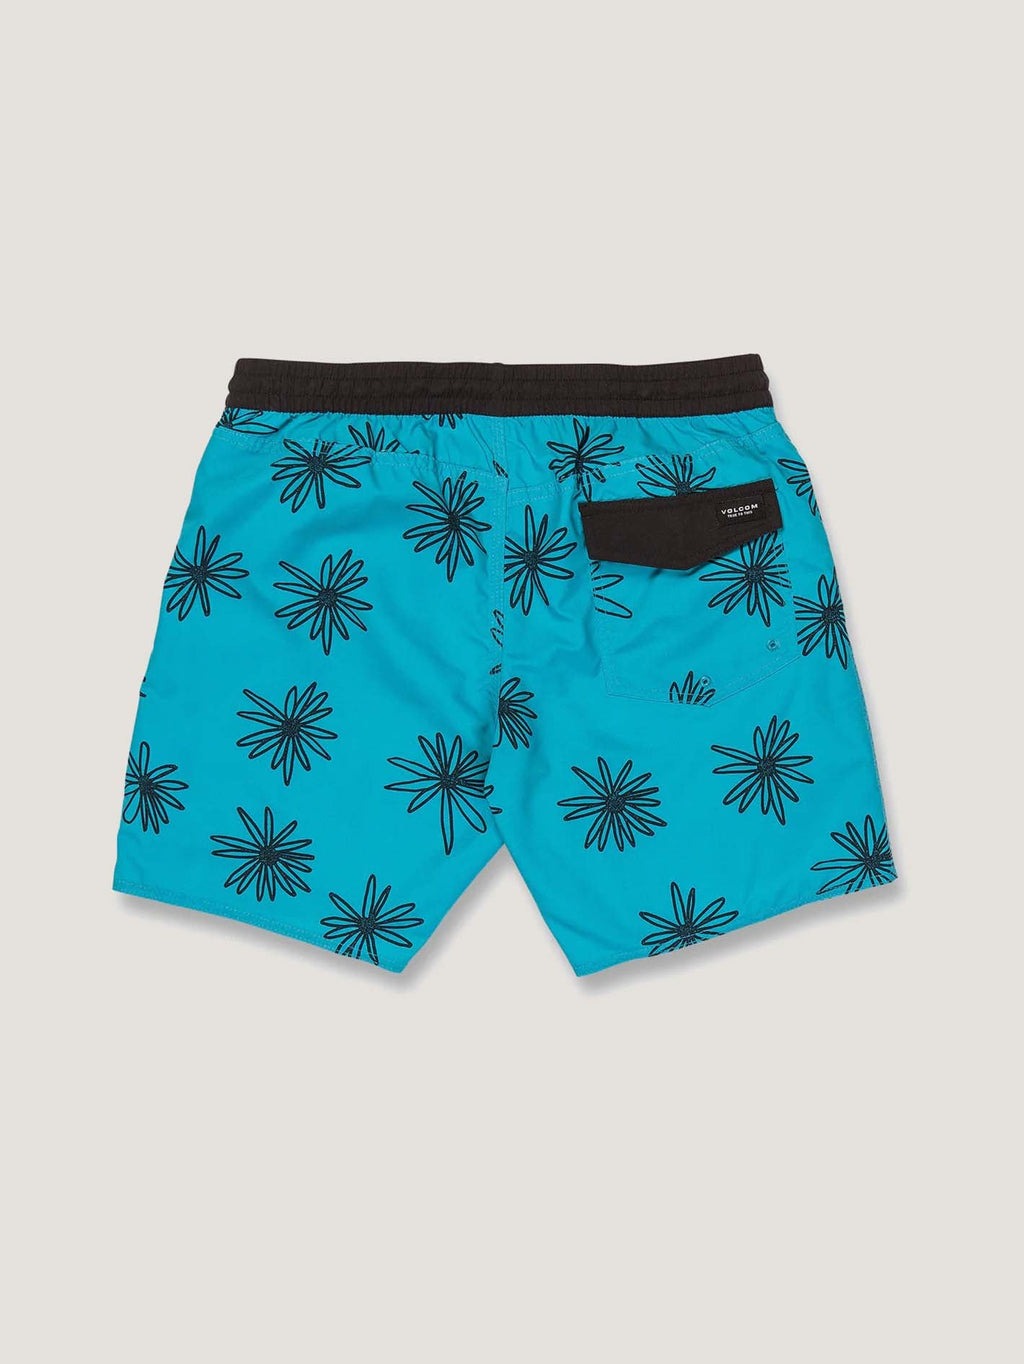 VOLCOM POLLY PACK TRUNK 17